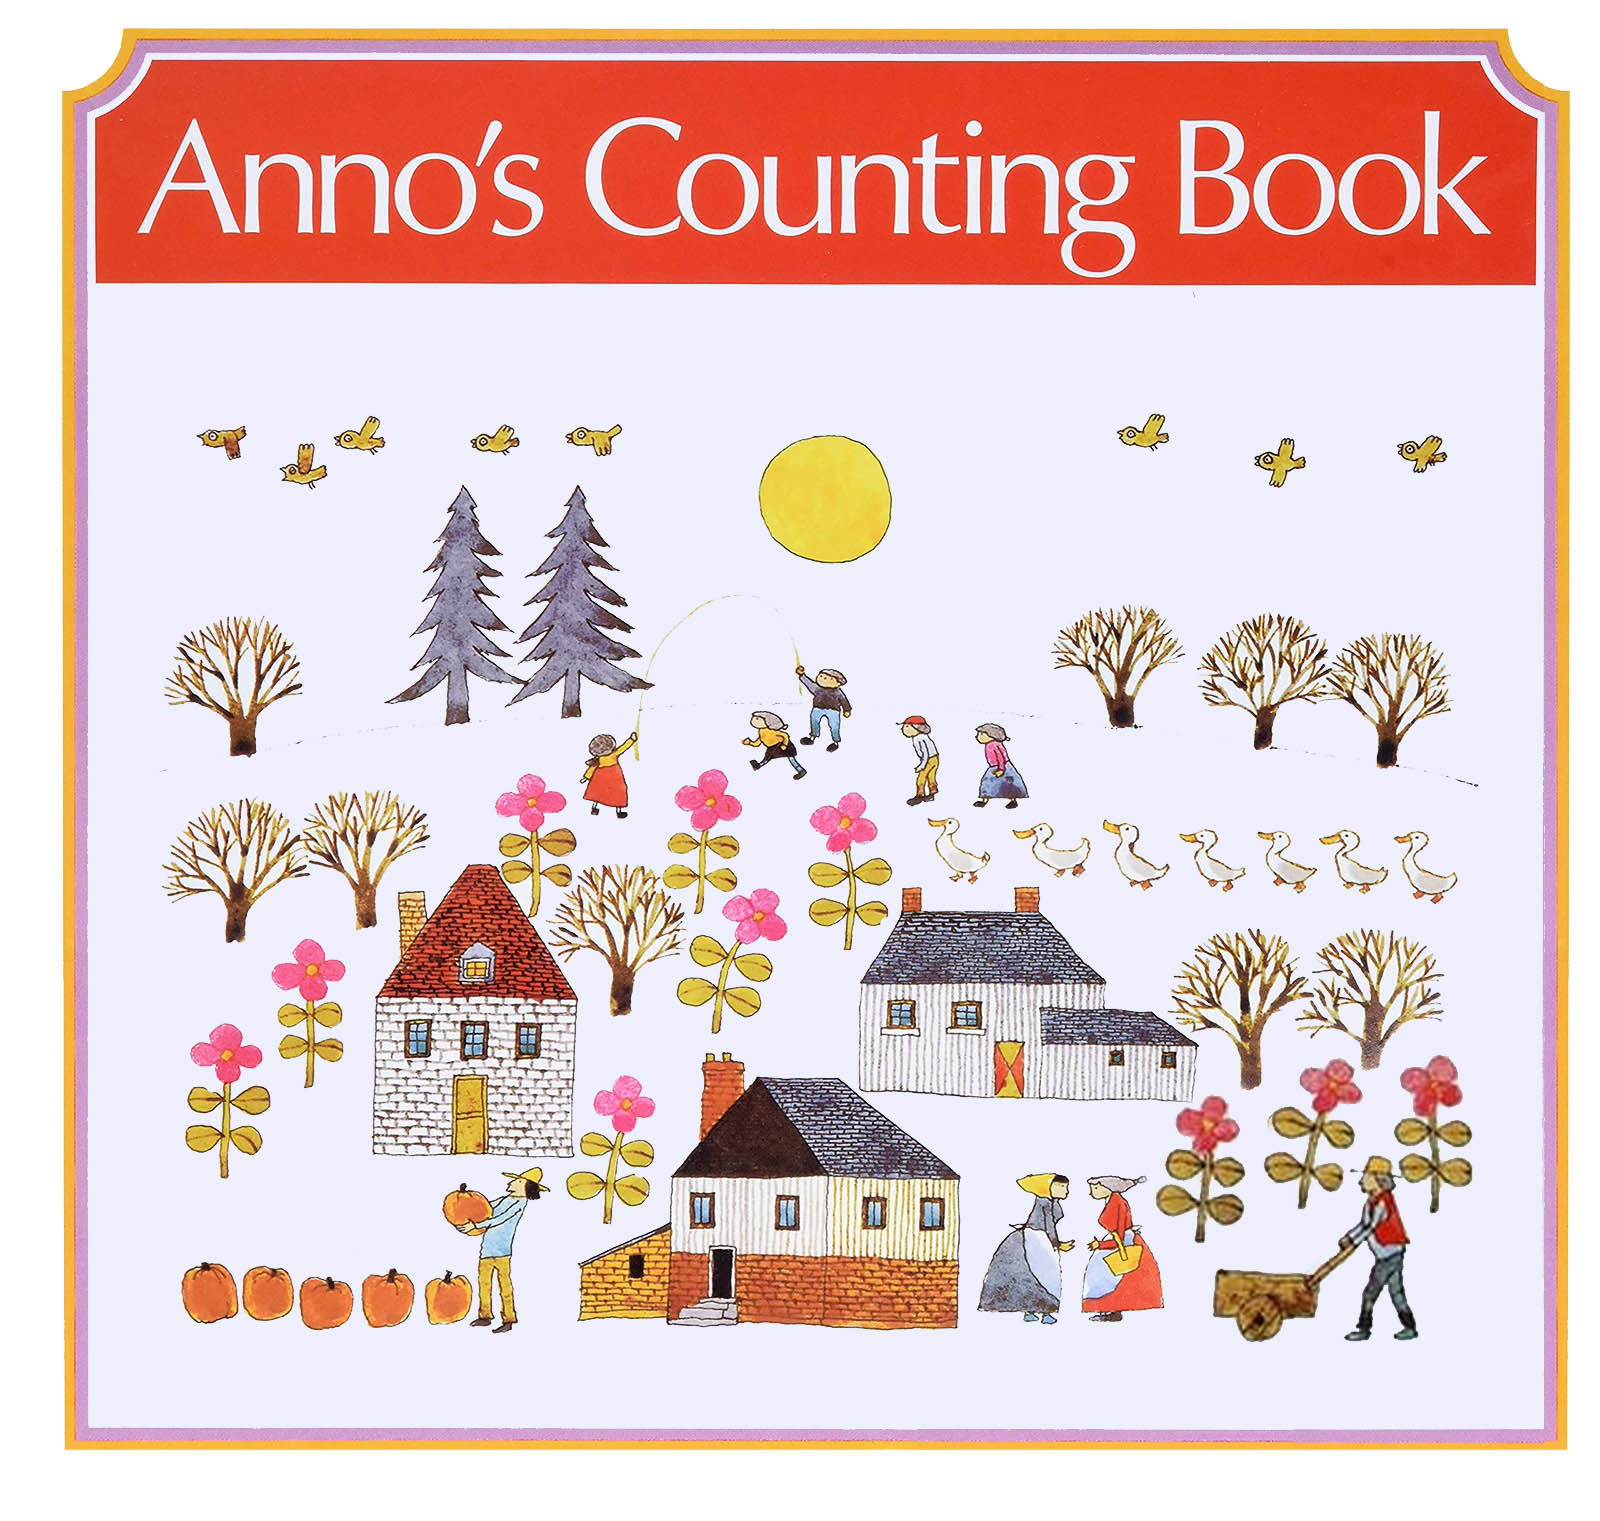 Anno’s Counting Book